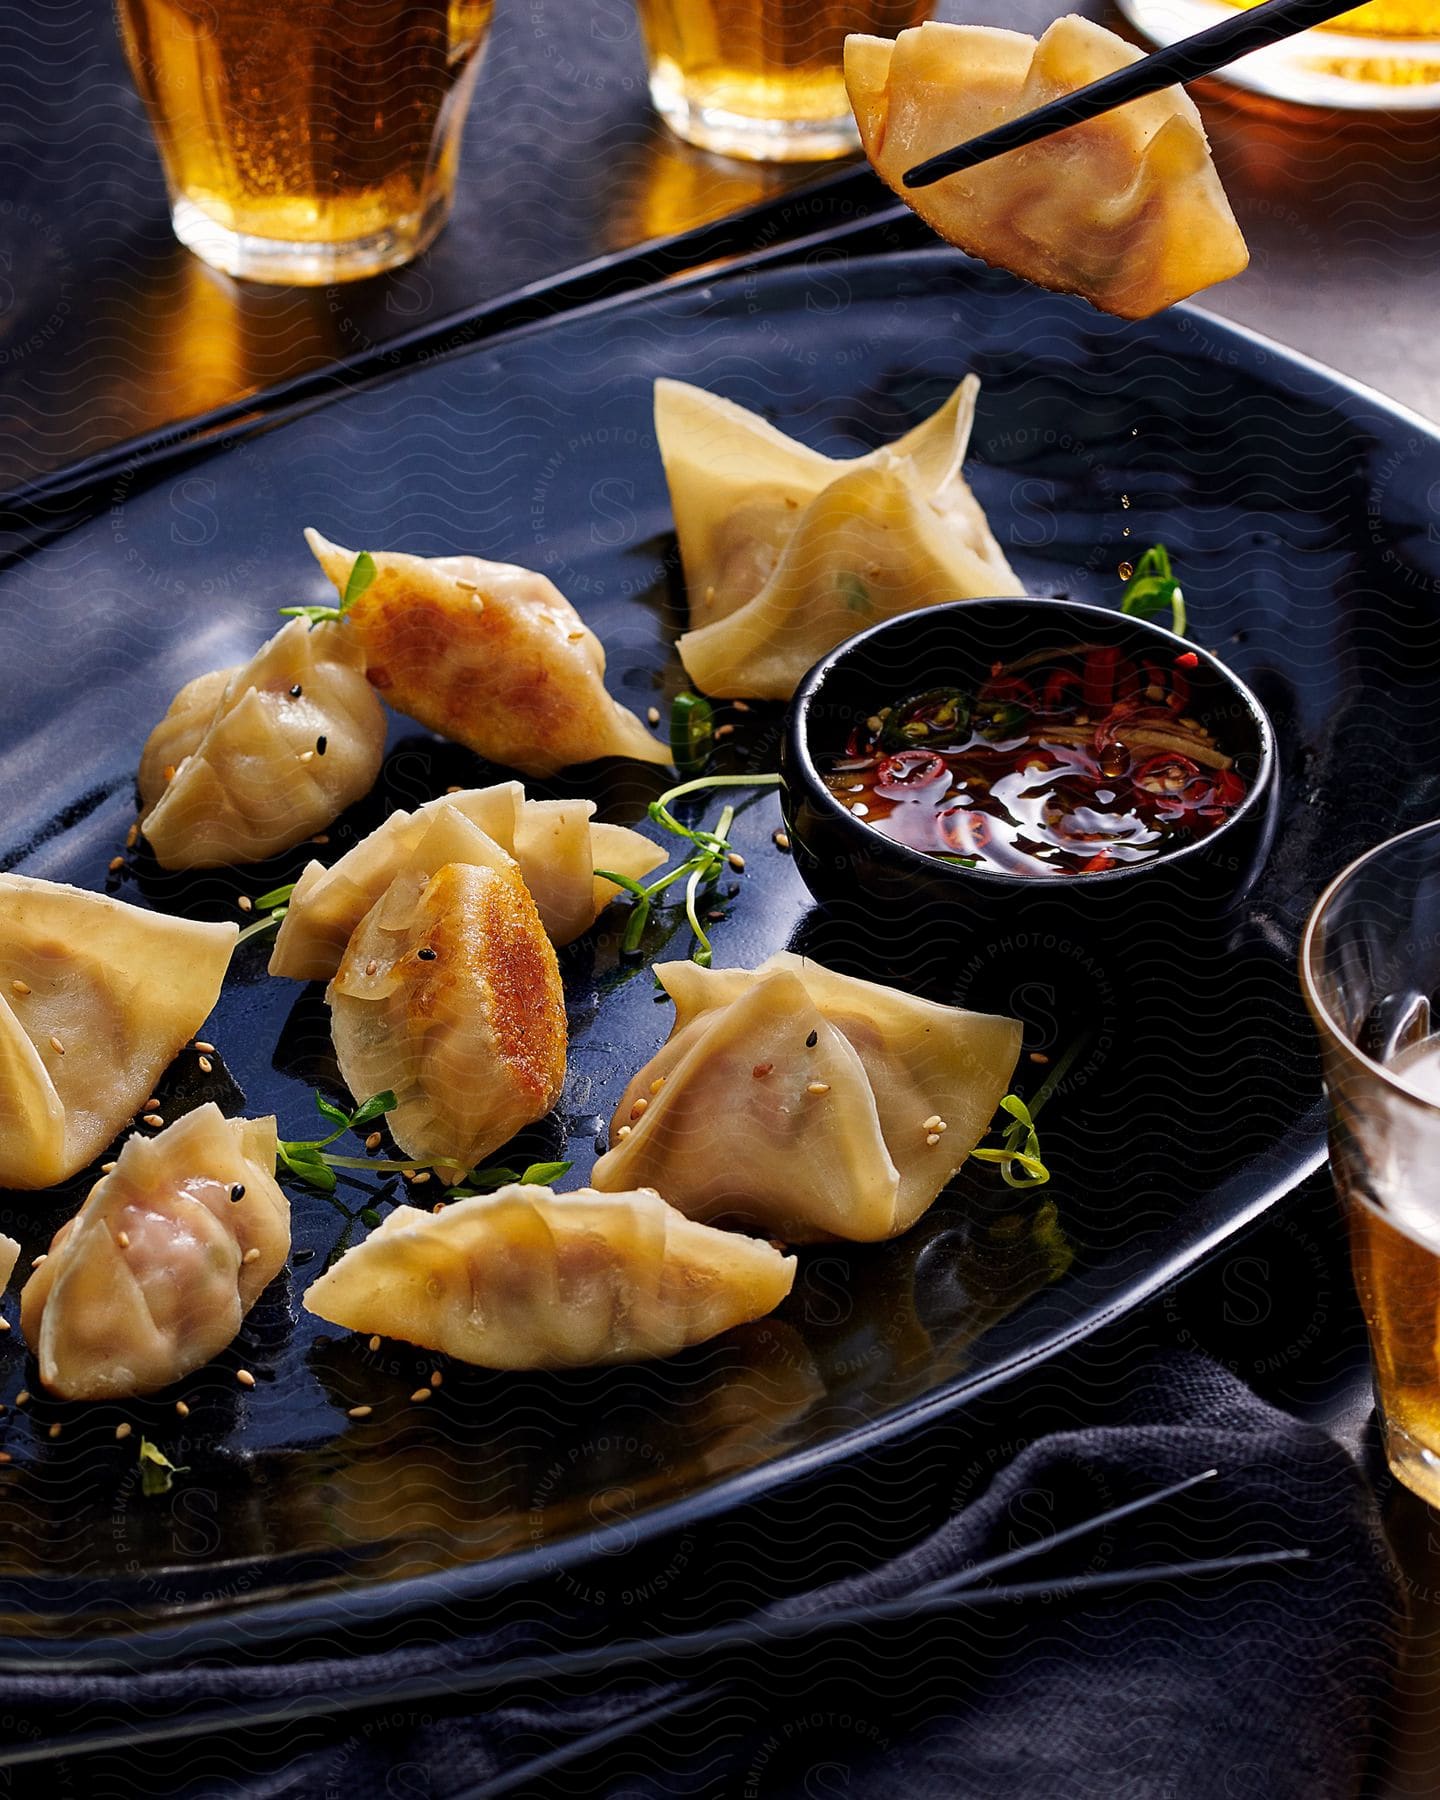 Dumplings on a black plate with a small bowl of dipping sauce